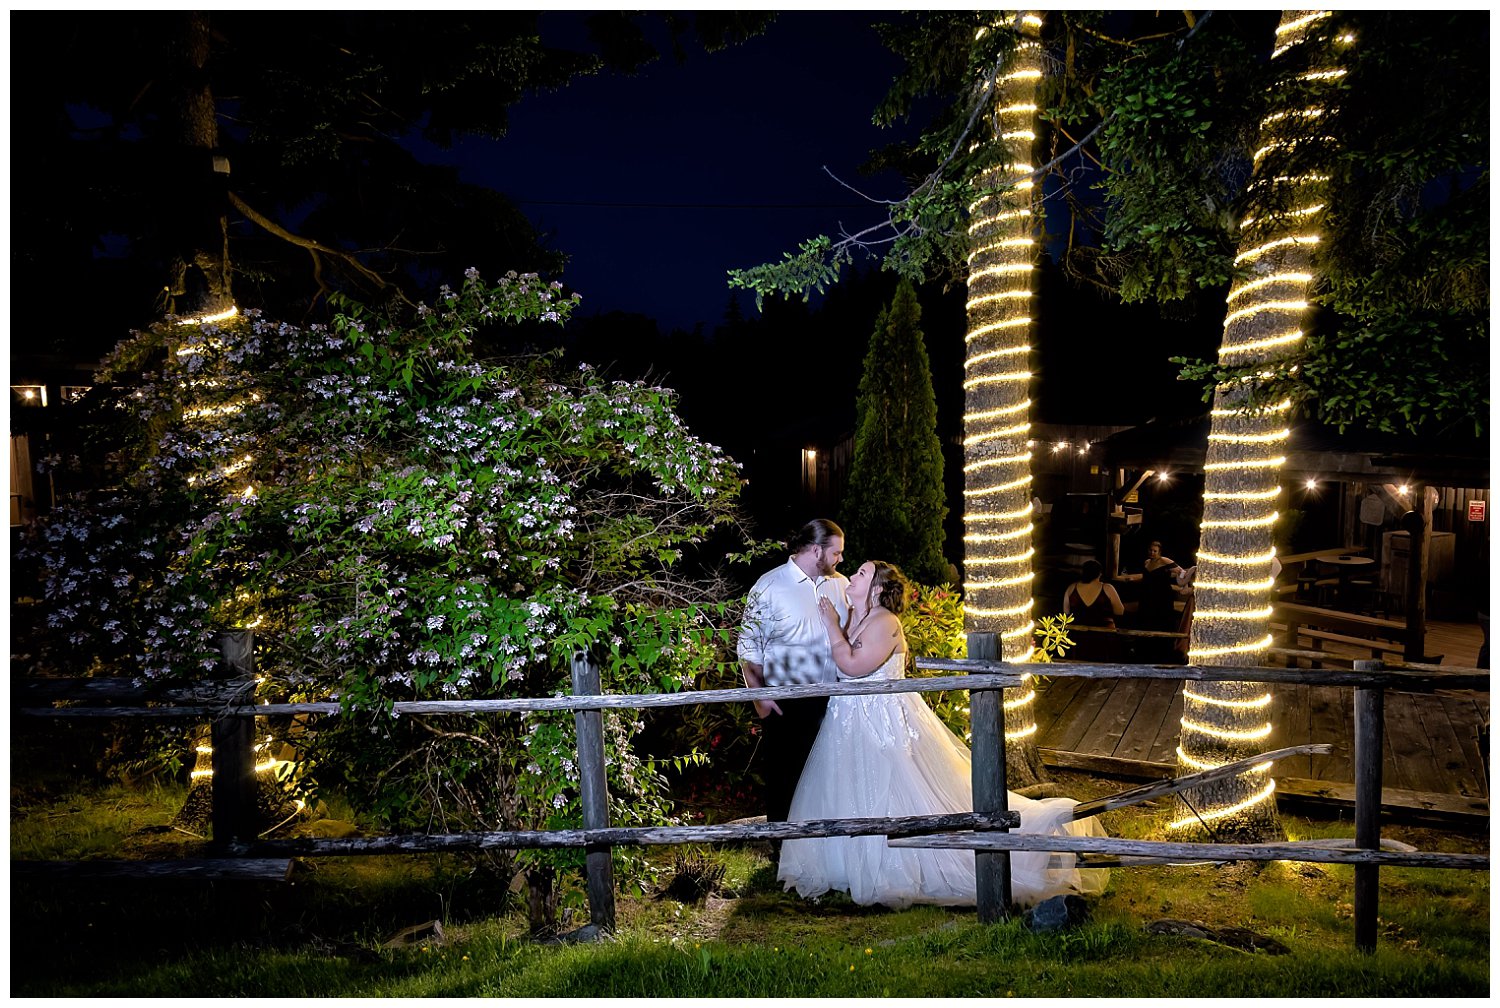 A bride and groom pose after the sun goes down for night wedding photos at Hatfield Farm among the twinkle lit trees.